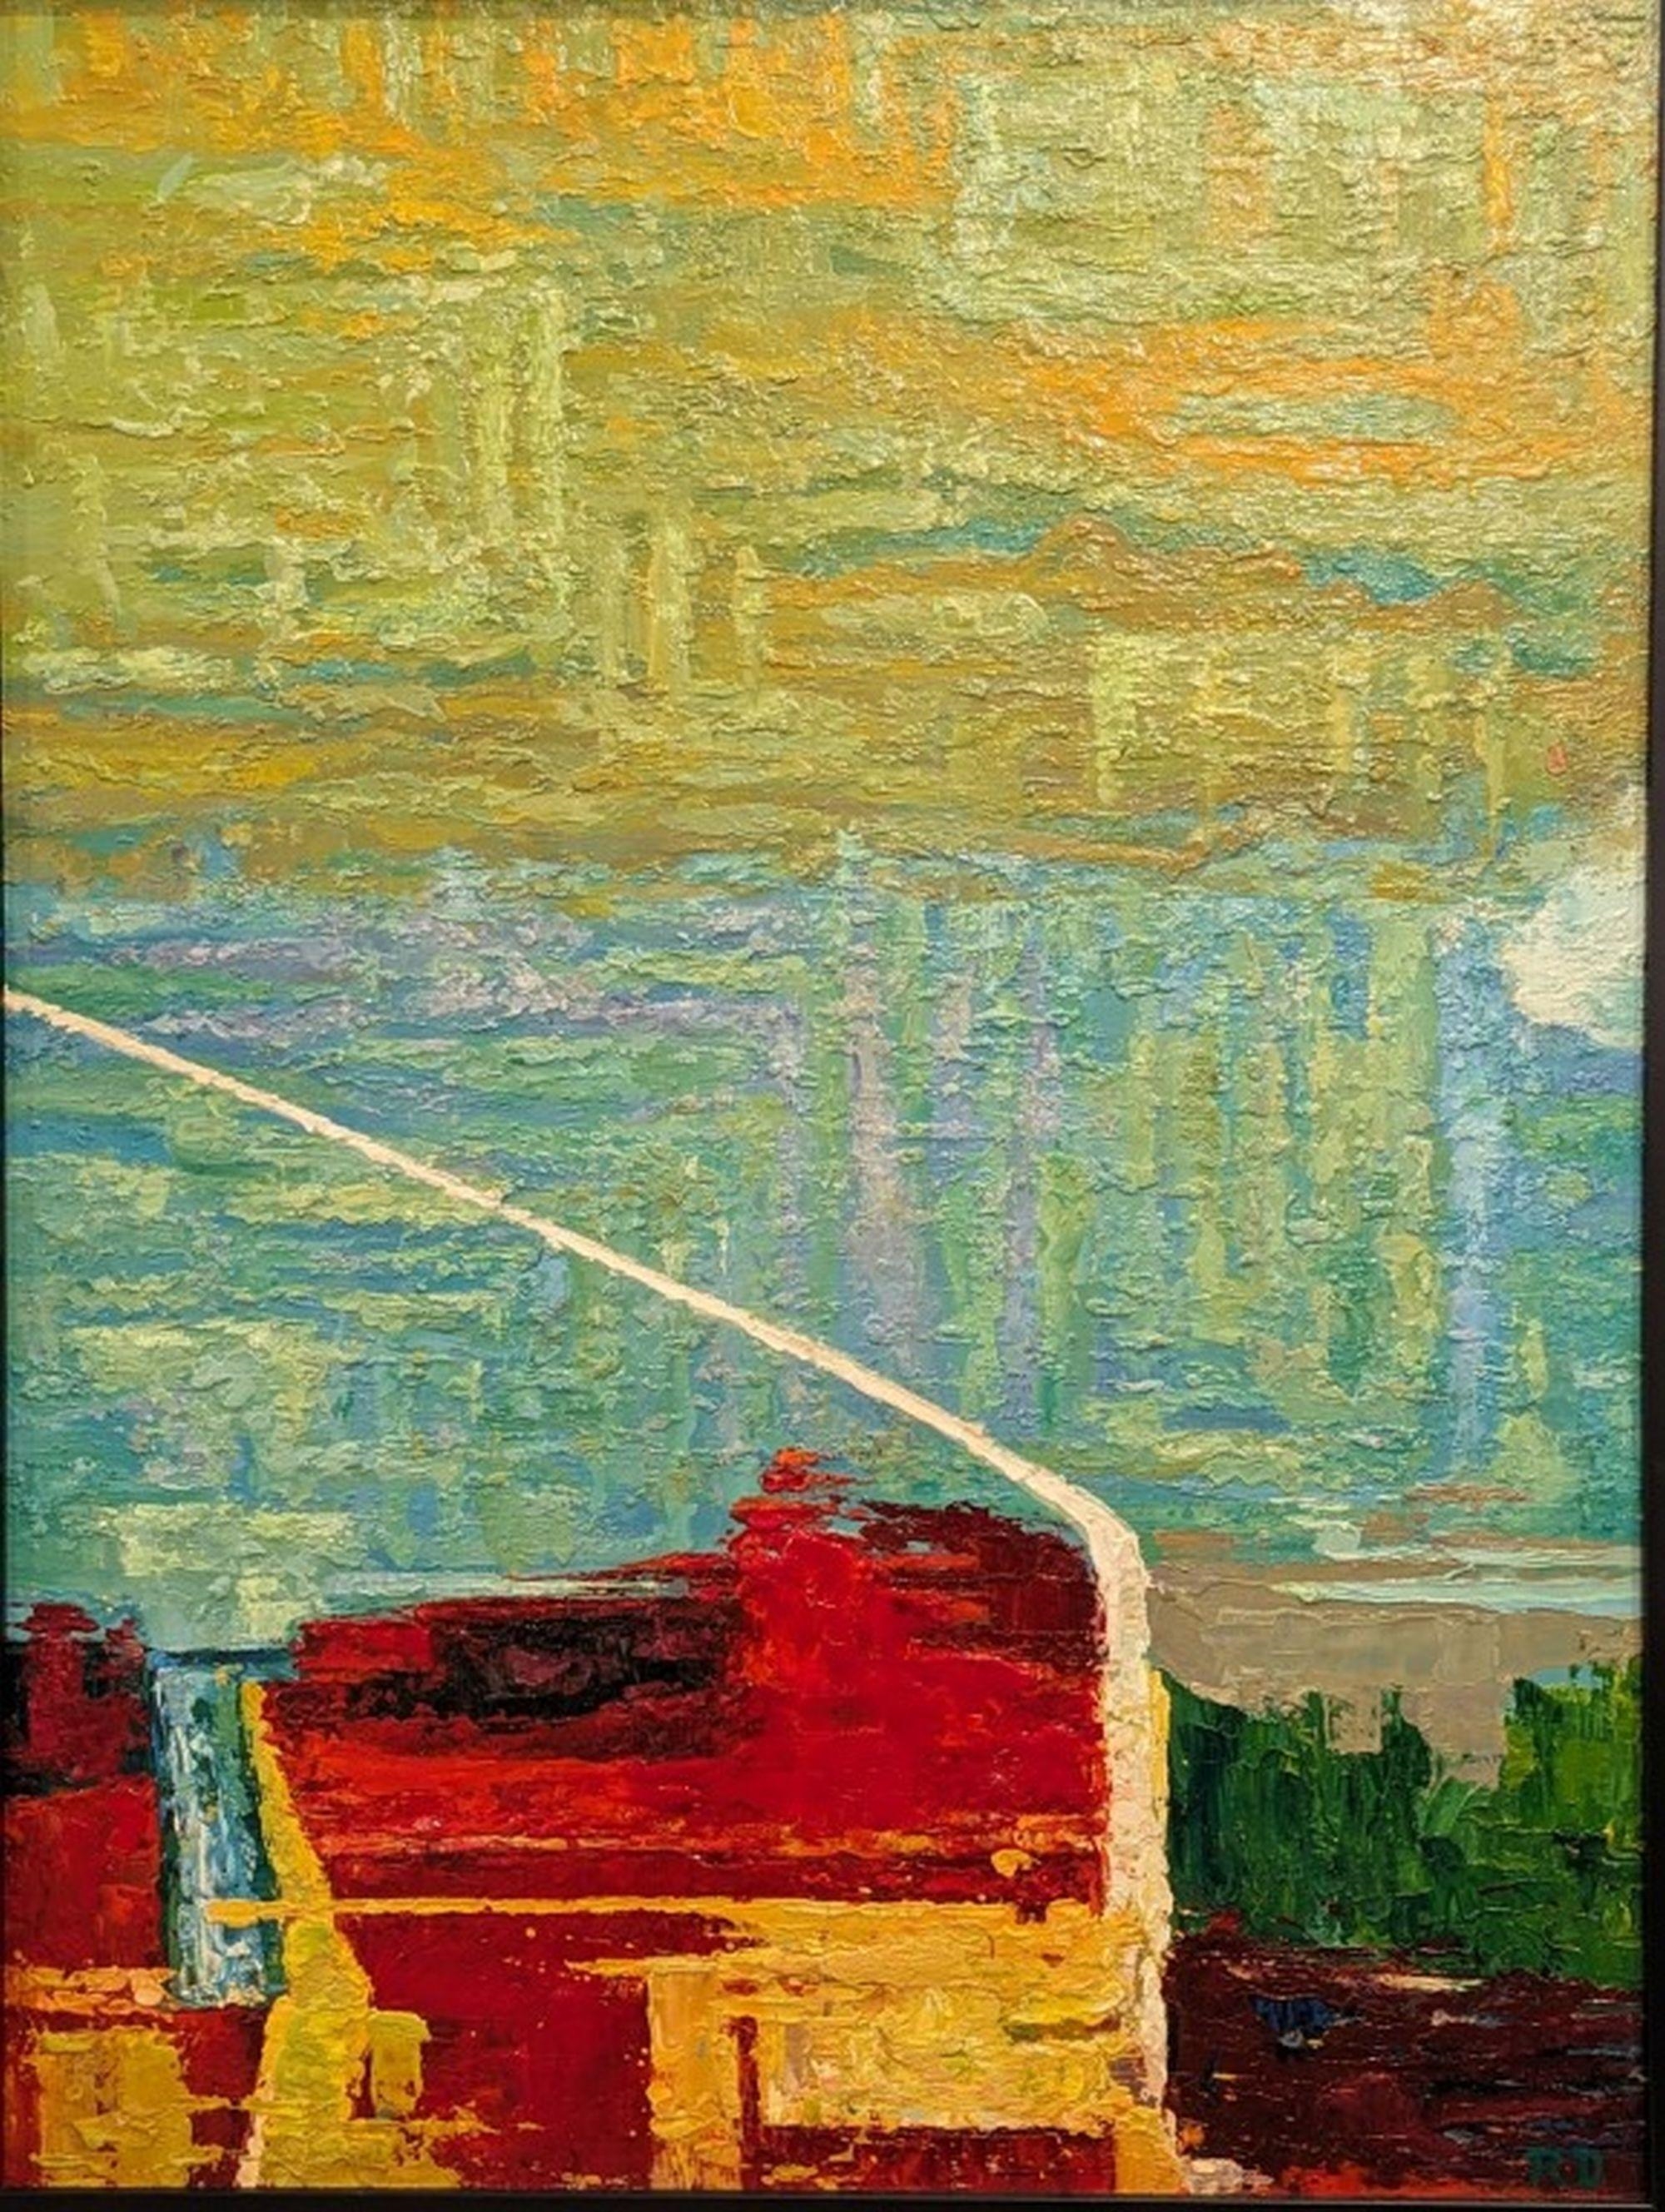 Artwork by Richard Diebenkorn, Abstract expressionism, Made of Oil on canvas